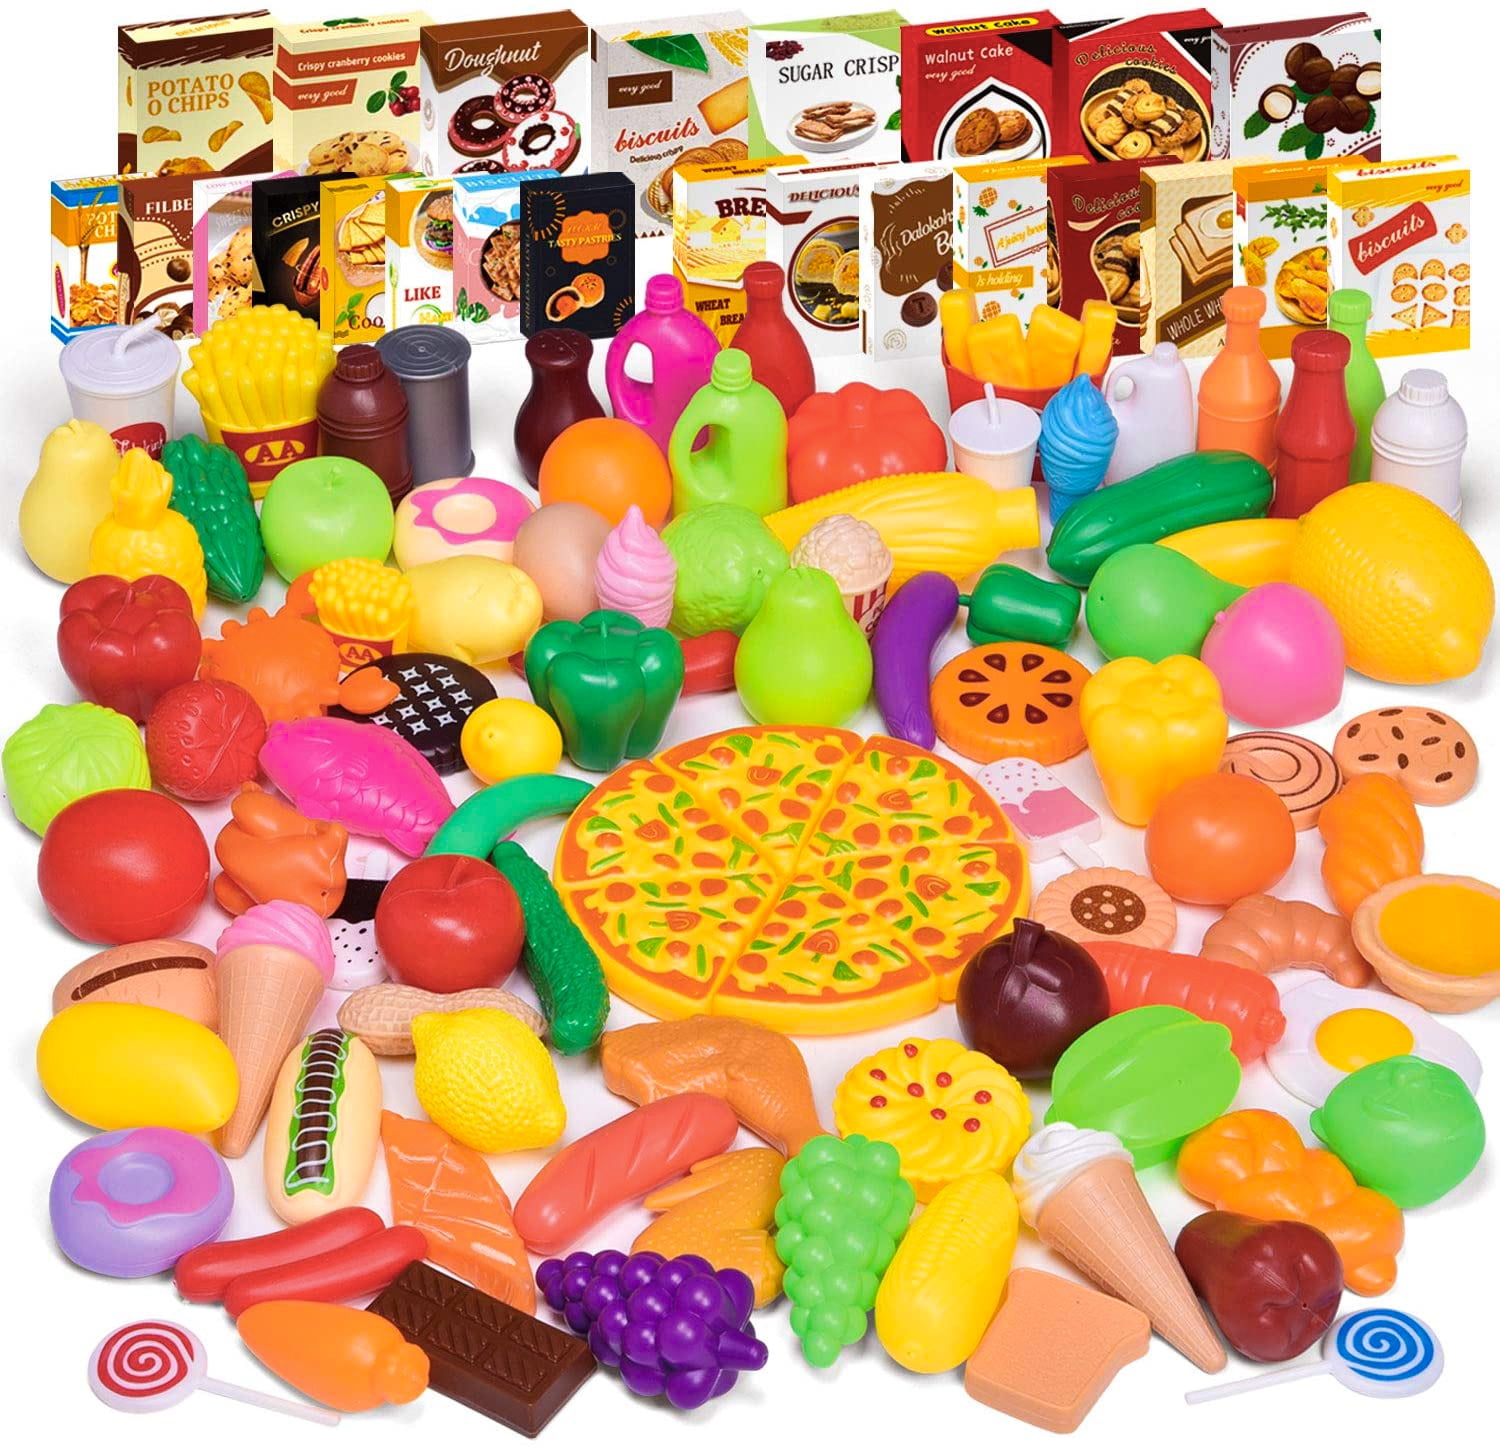 Fun Little Toys 128 Pcs Play Food for Kids Kitchen, Toy Foods with ...